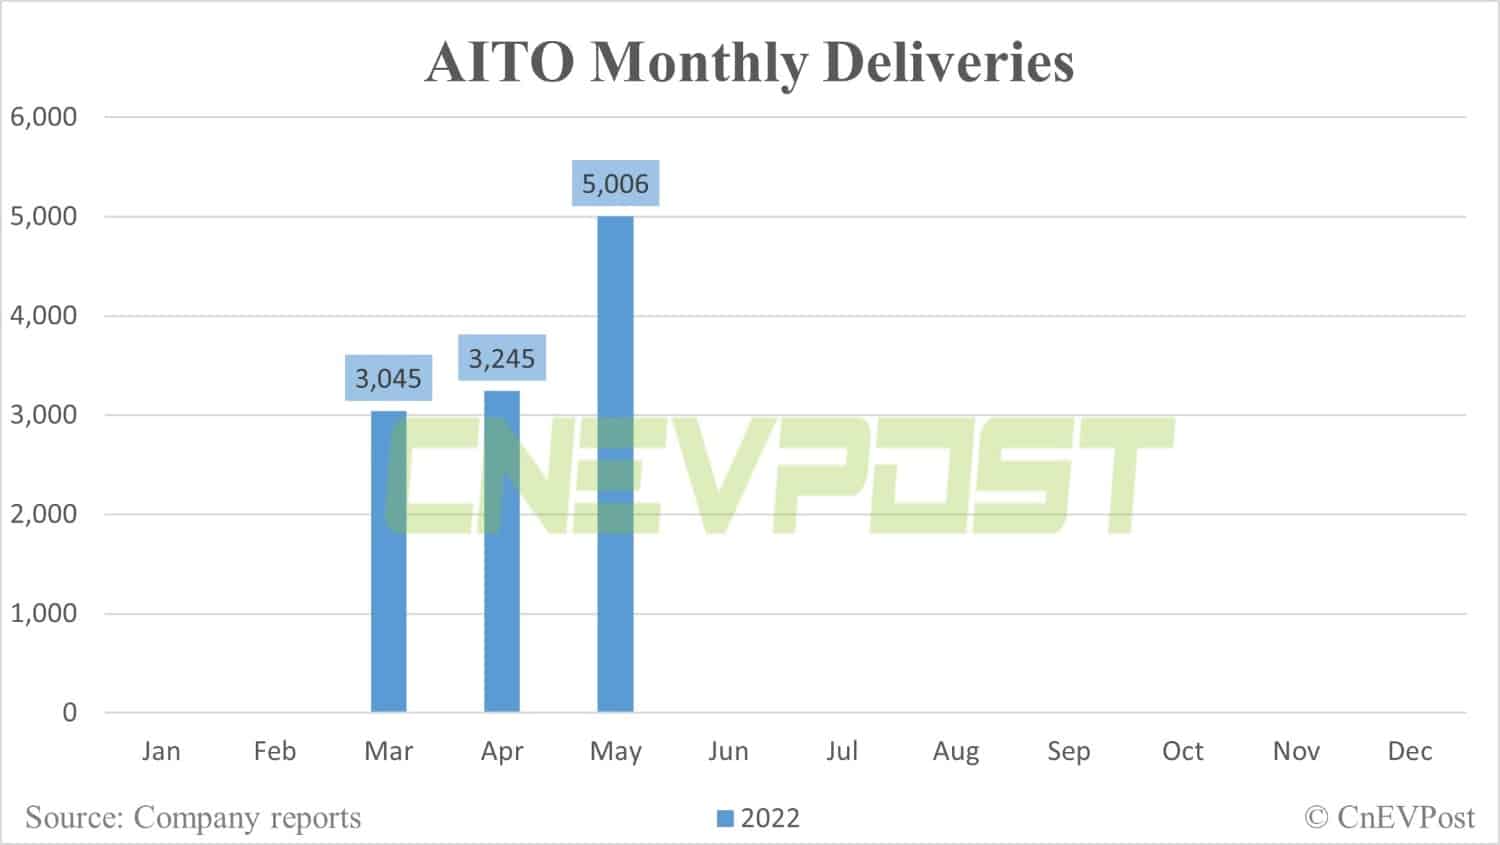 Huawei-backed AITO delivers 5,006 units in May, up 54% from April-CnEVPost